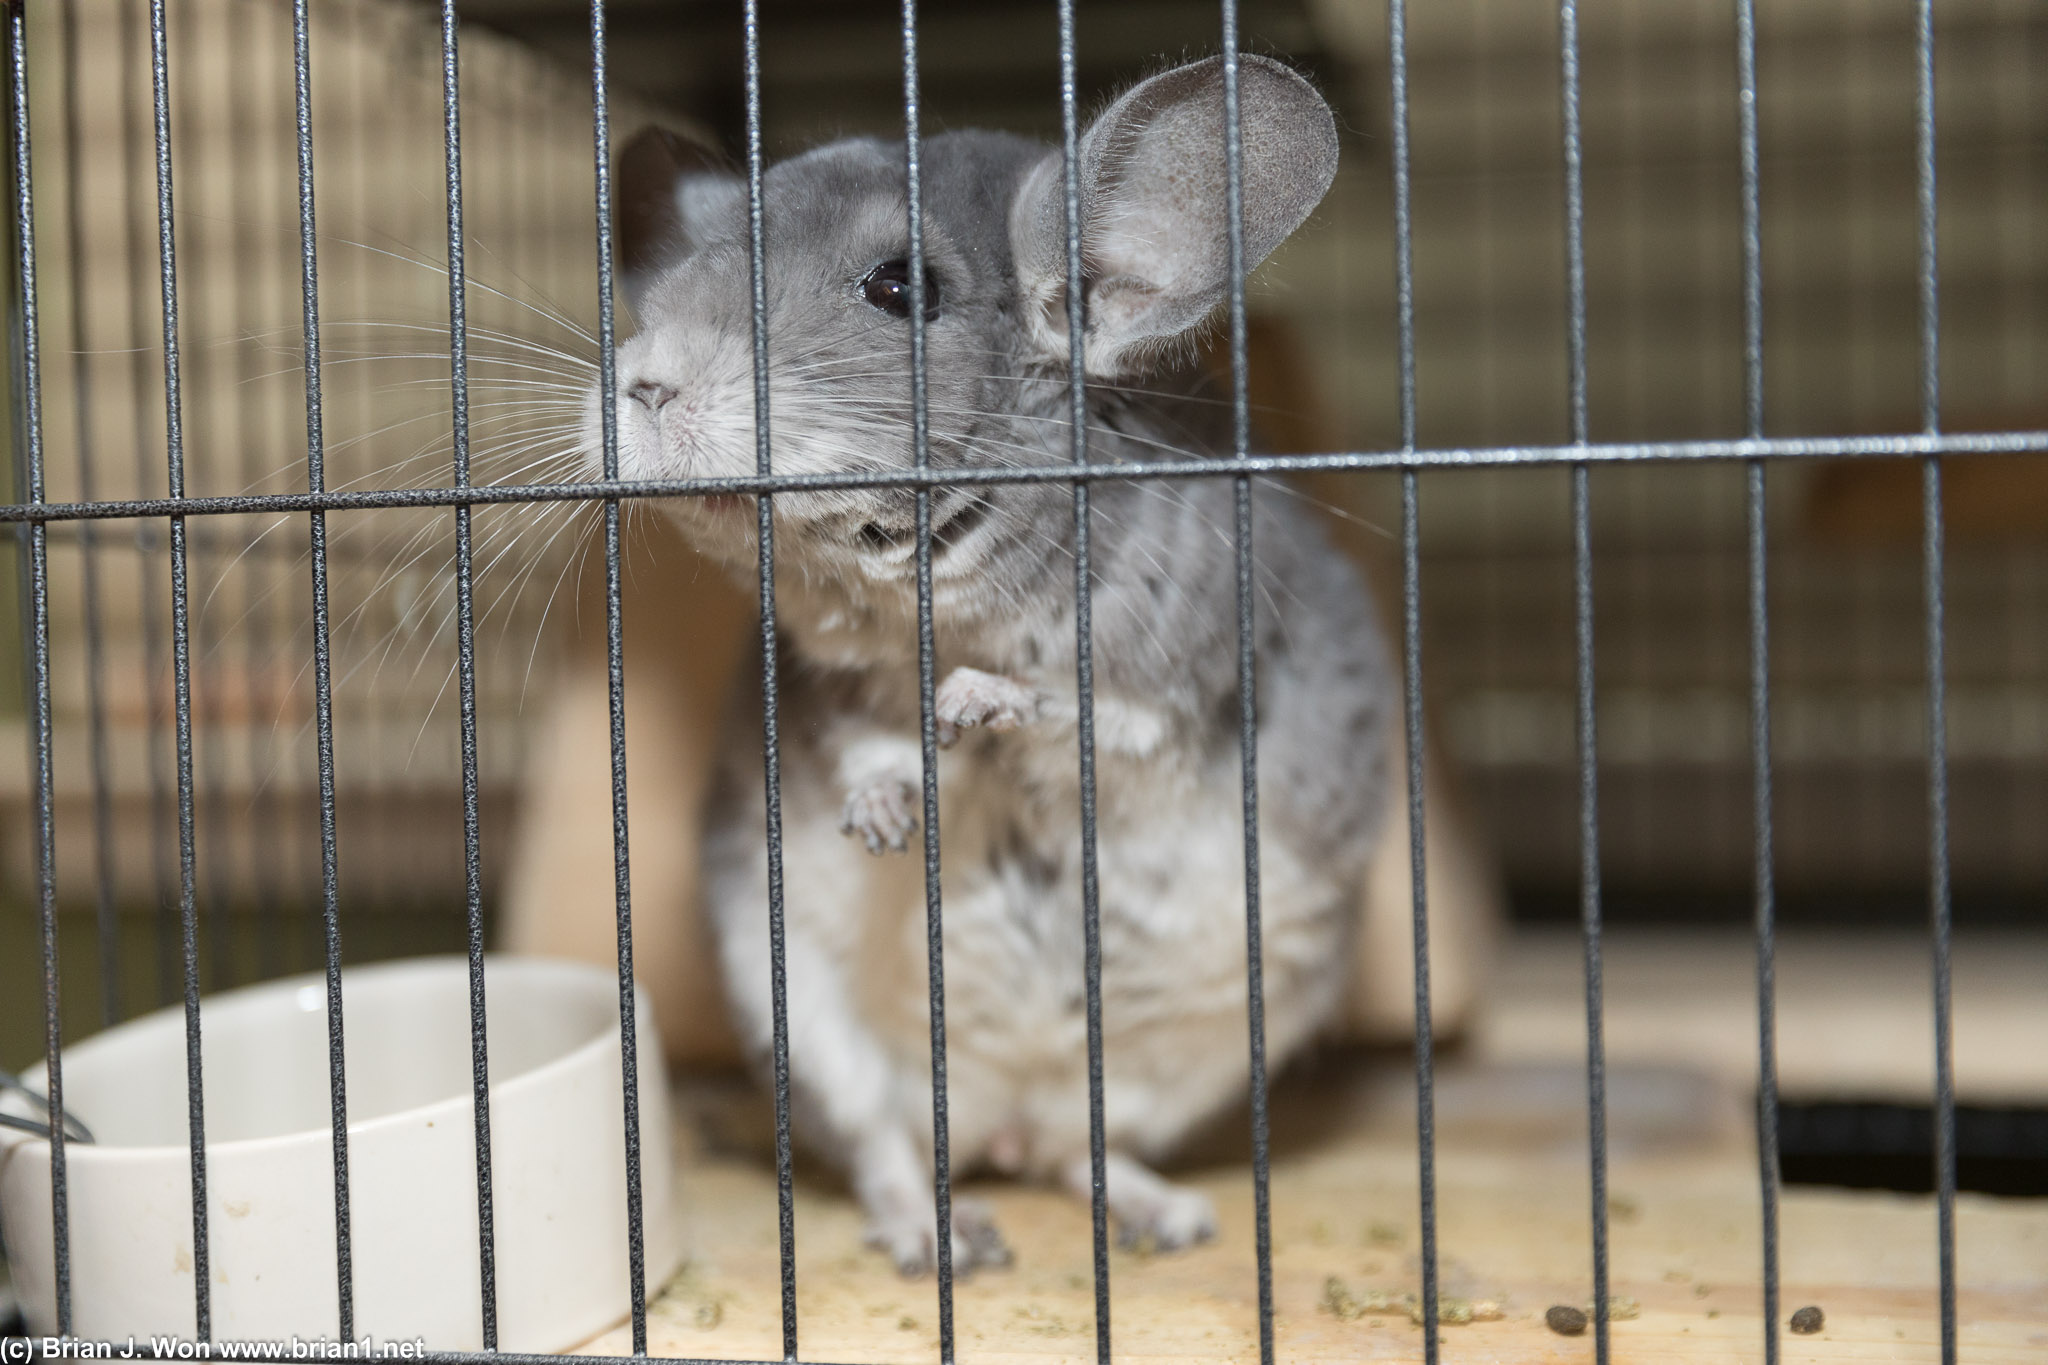 Chinchilla. Check out those big ears and long whiskers!